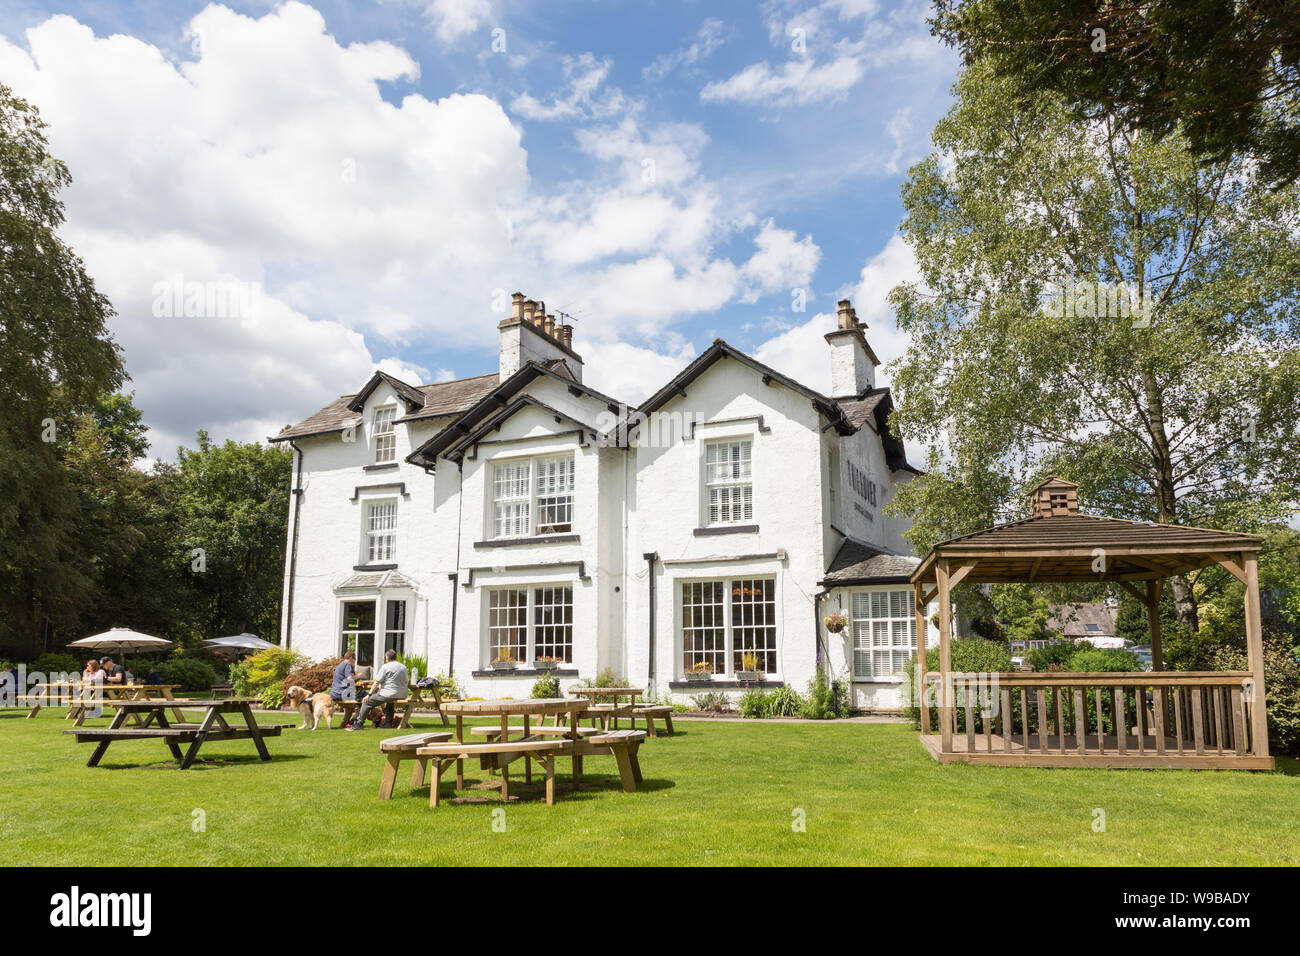 Grasmere, Cumbria, UK: Tweedies Bar and Lodge, a hotel, bar and restaurant, selling locally-brewed real ales. A garden contains tables and chairs. Stock Photo